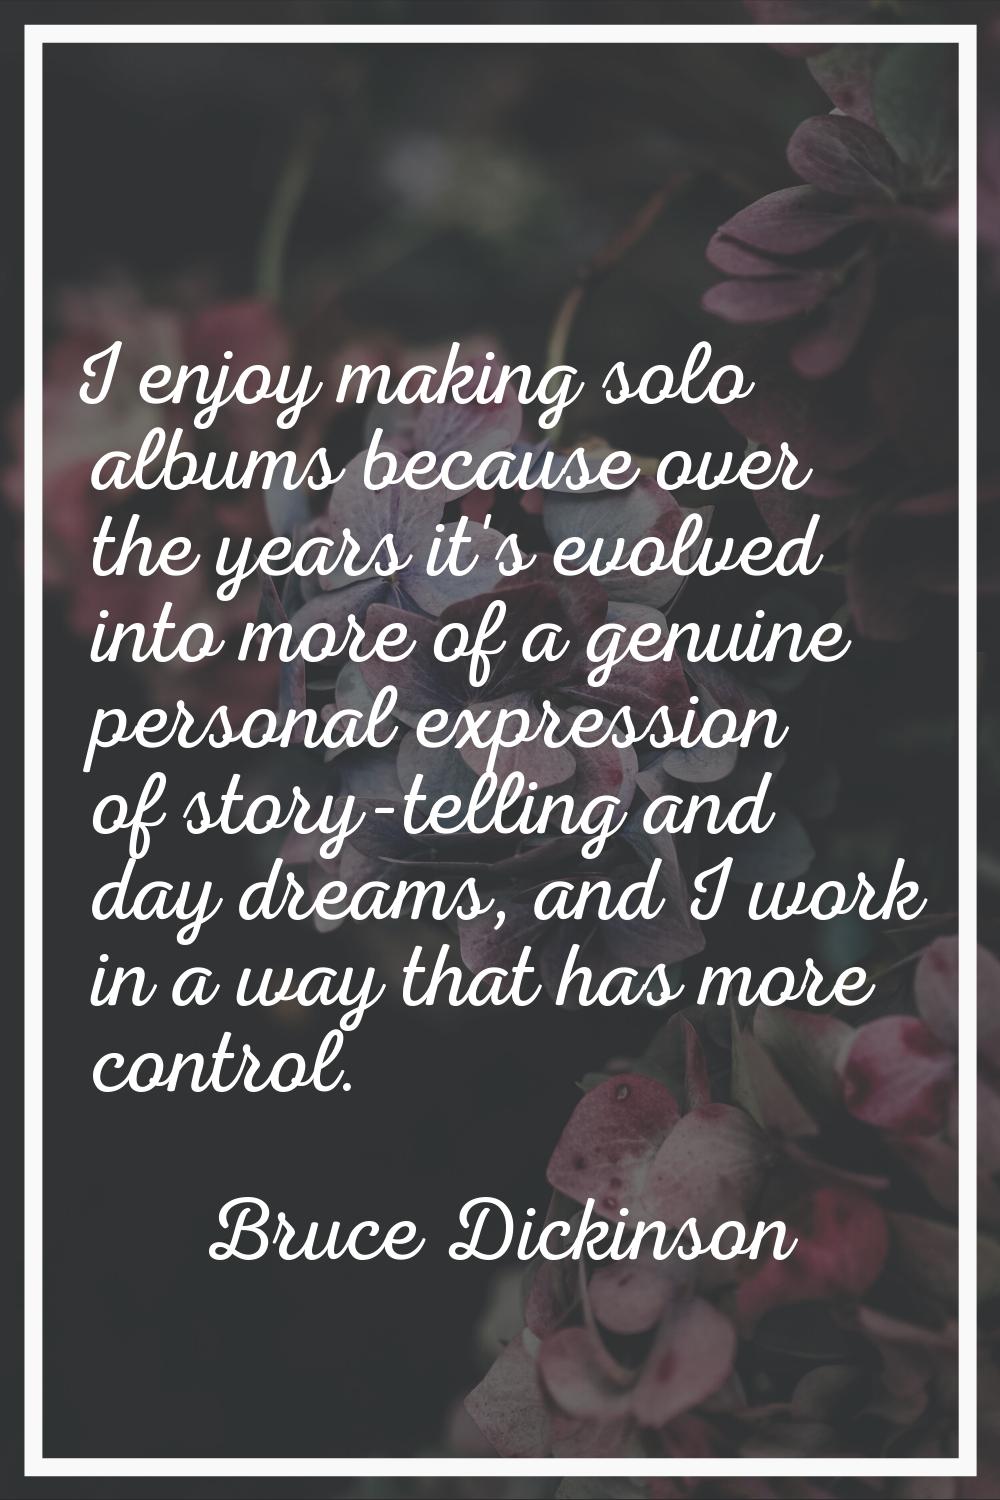 I enjoy making solo albums because over the years it's evolved into more of a genuine personal expr